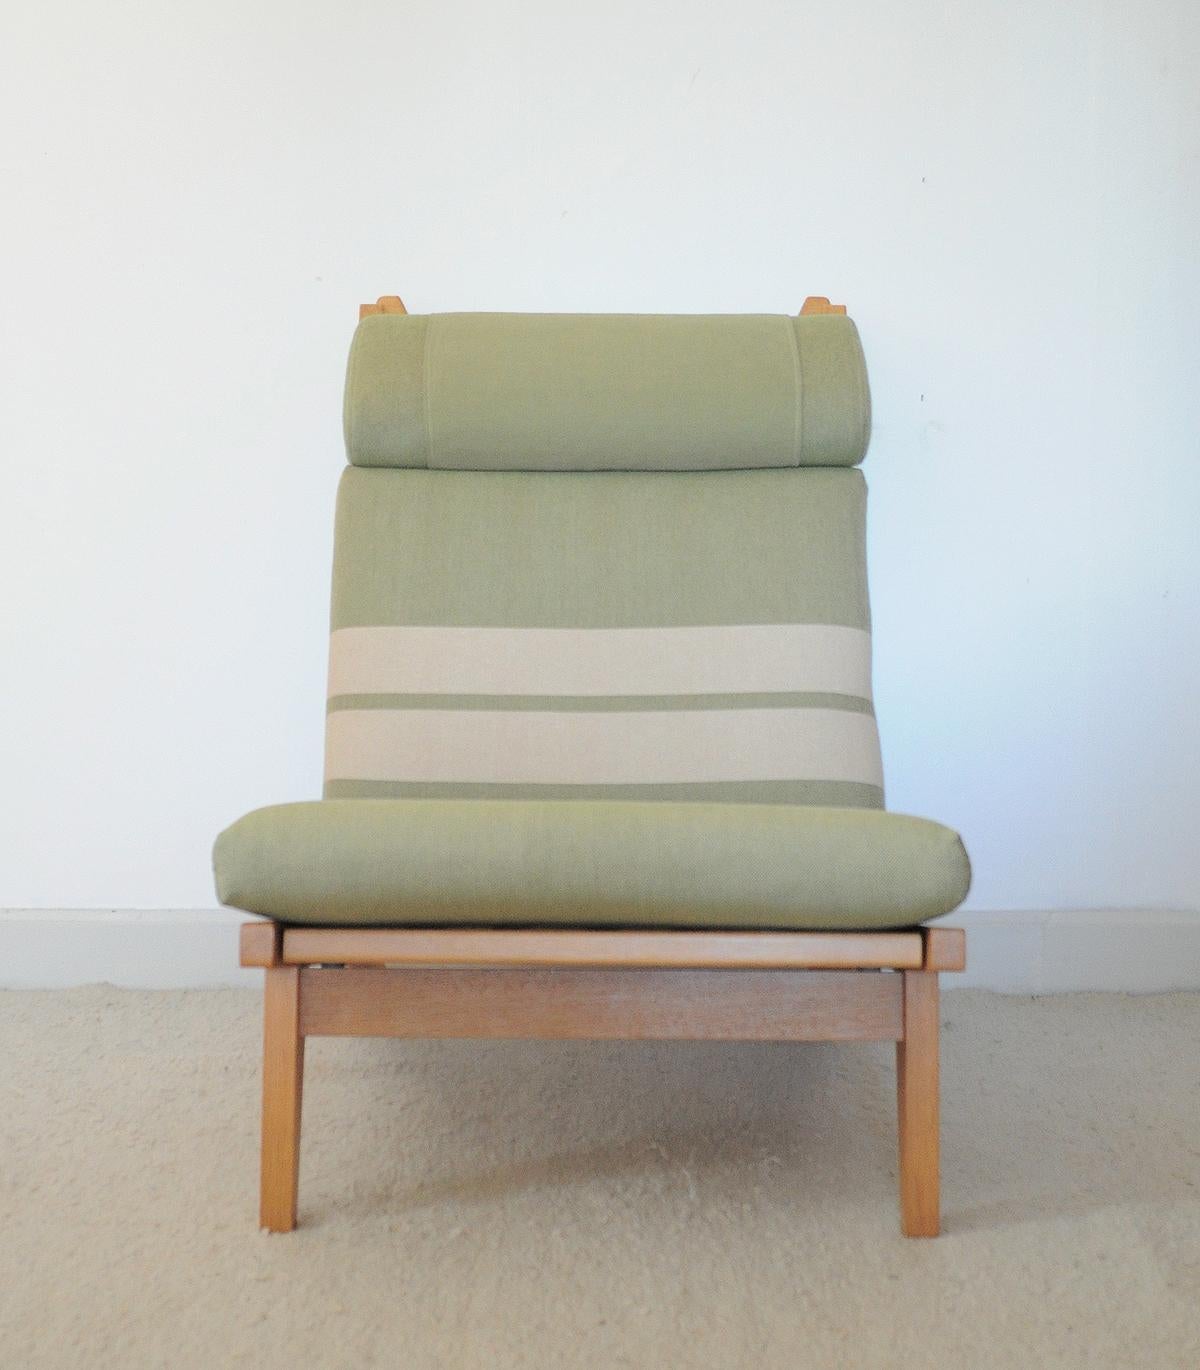 Danish Lounge Chair Made of Oak Designed in 1969 by Hans J. Wegner, Produced by GETAMA